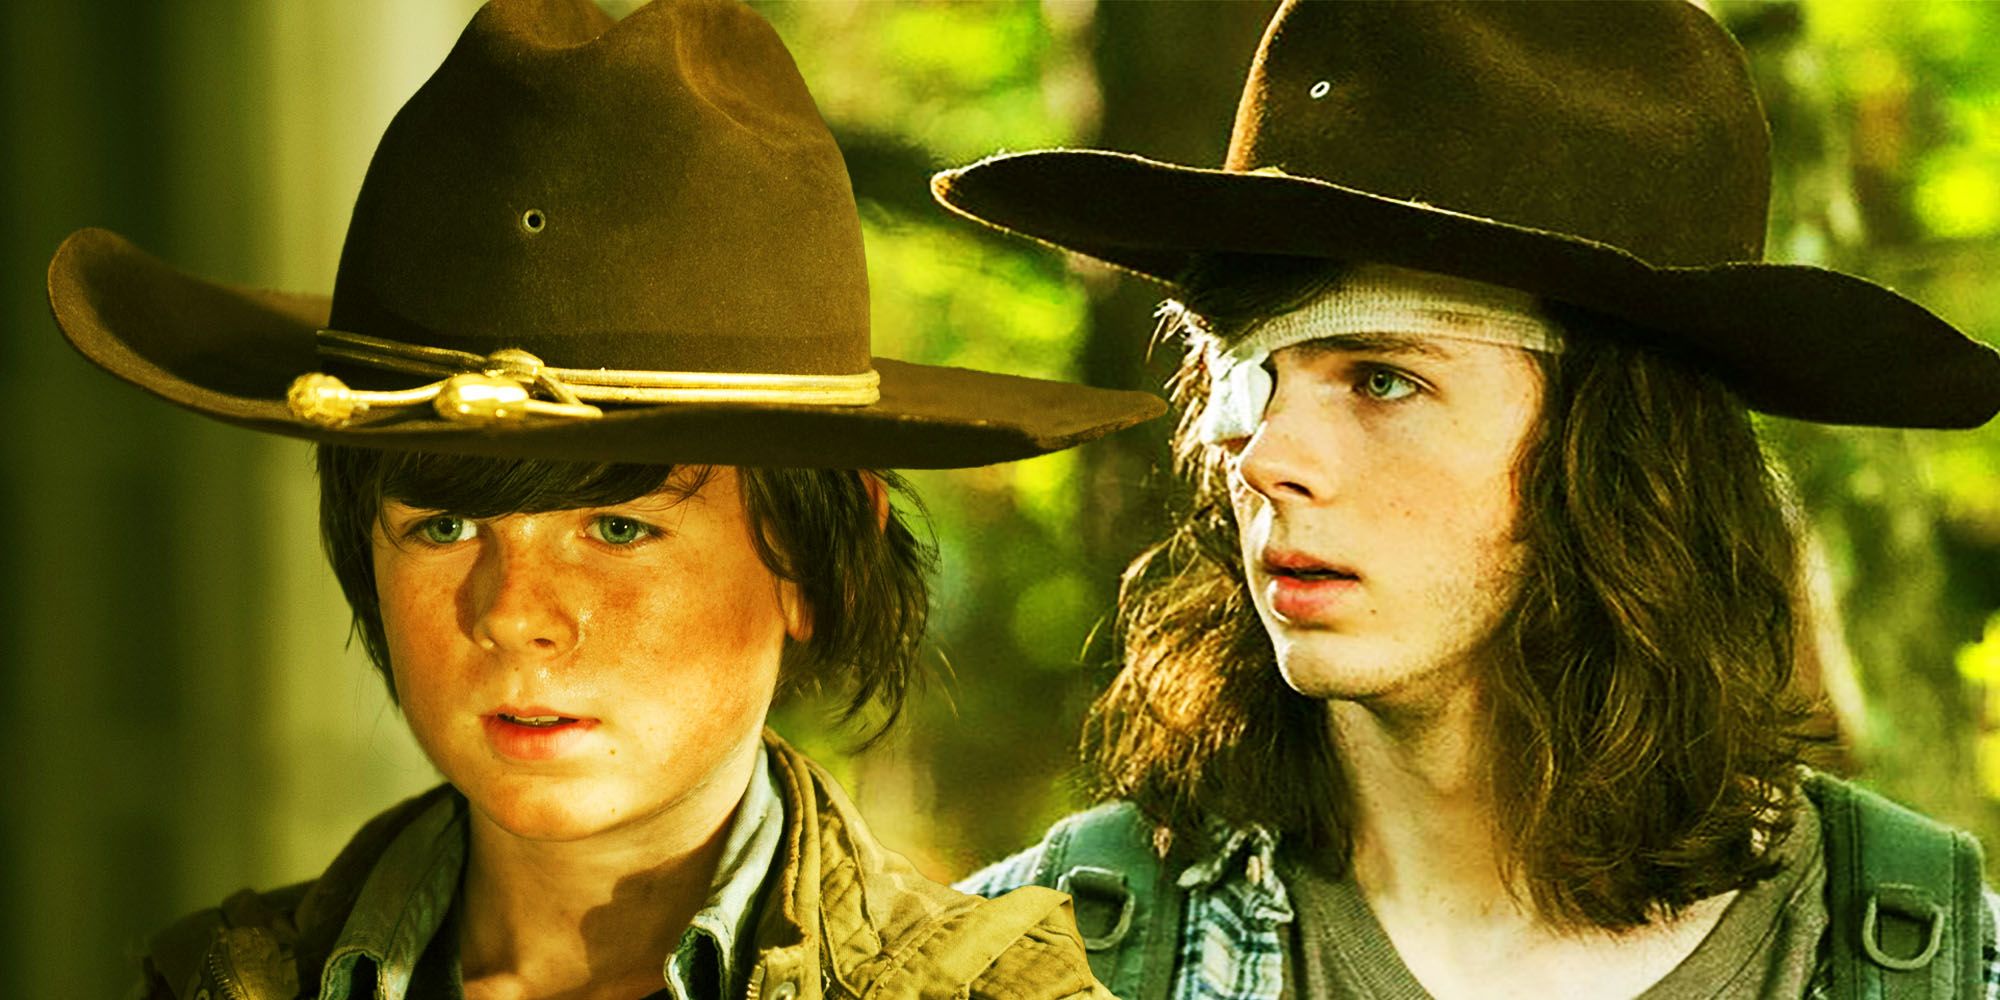 Chandler Riggs as Carl Grimes in Walking Dead old and young